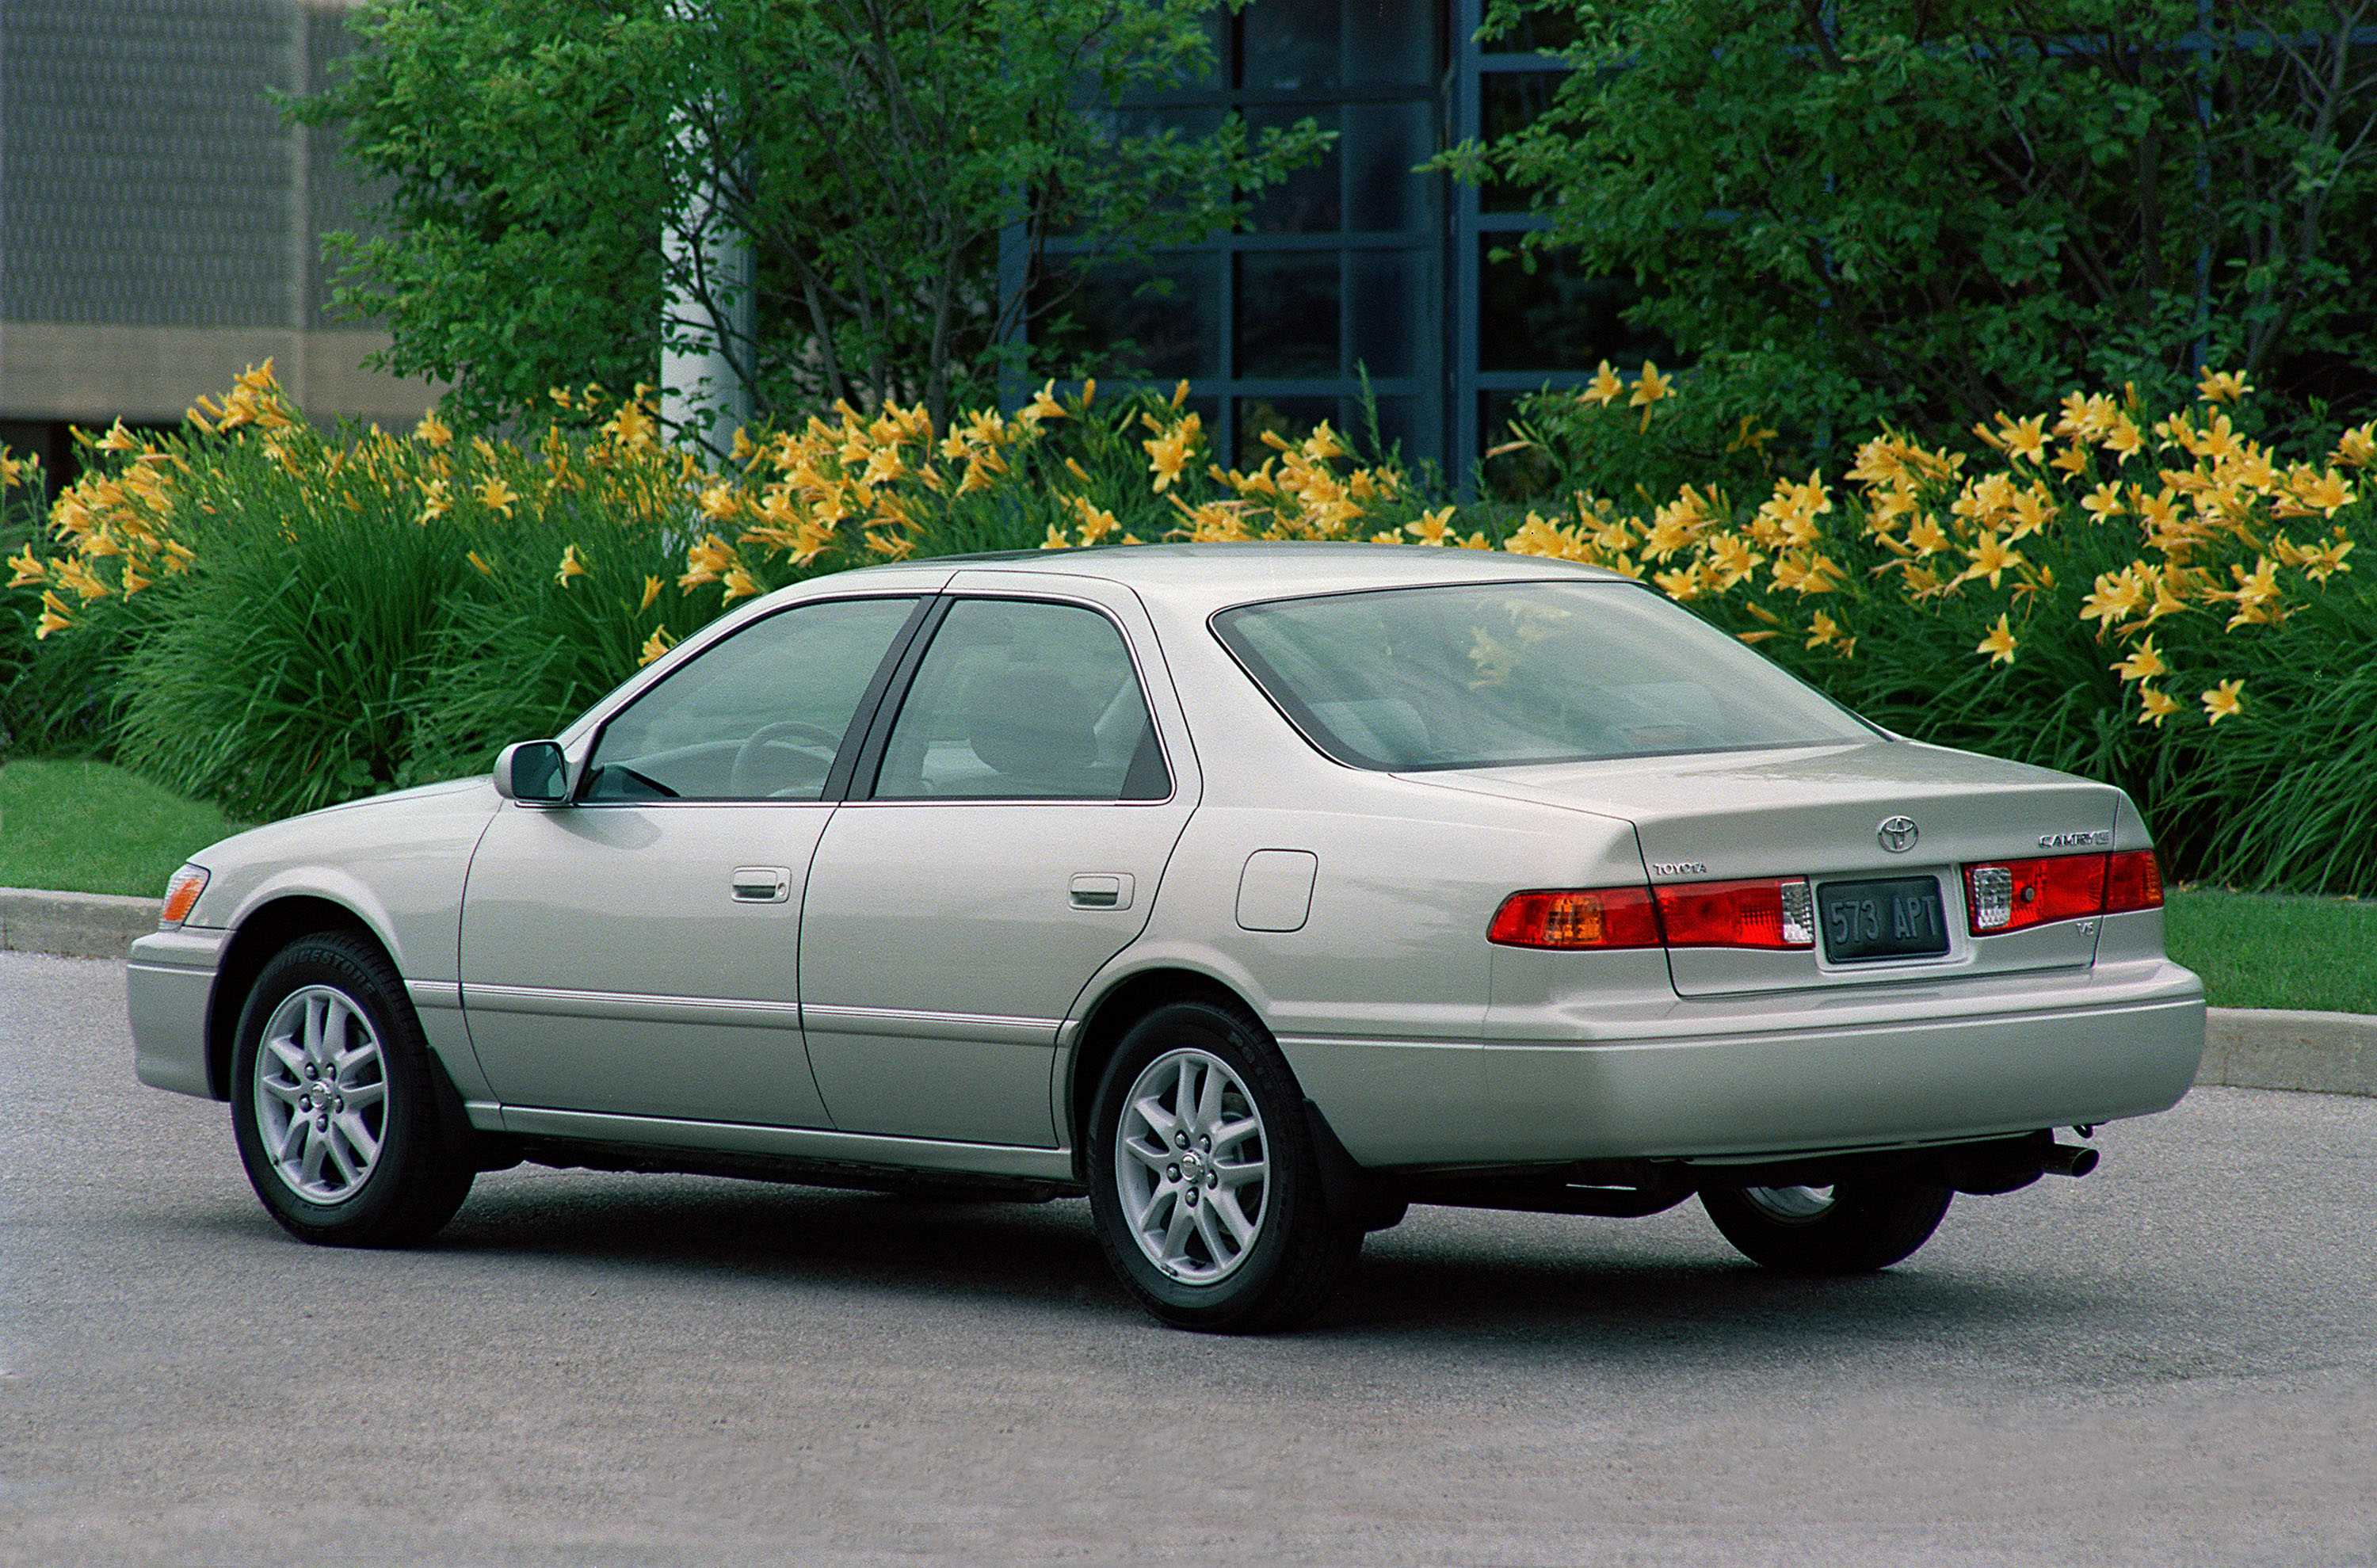 2000 Toyota Camry Silver for sale  Stock No 37761  Japanese Used Cars  Exporter